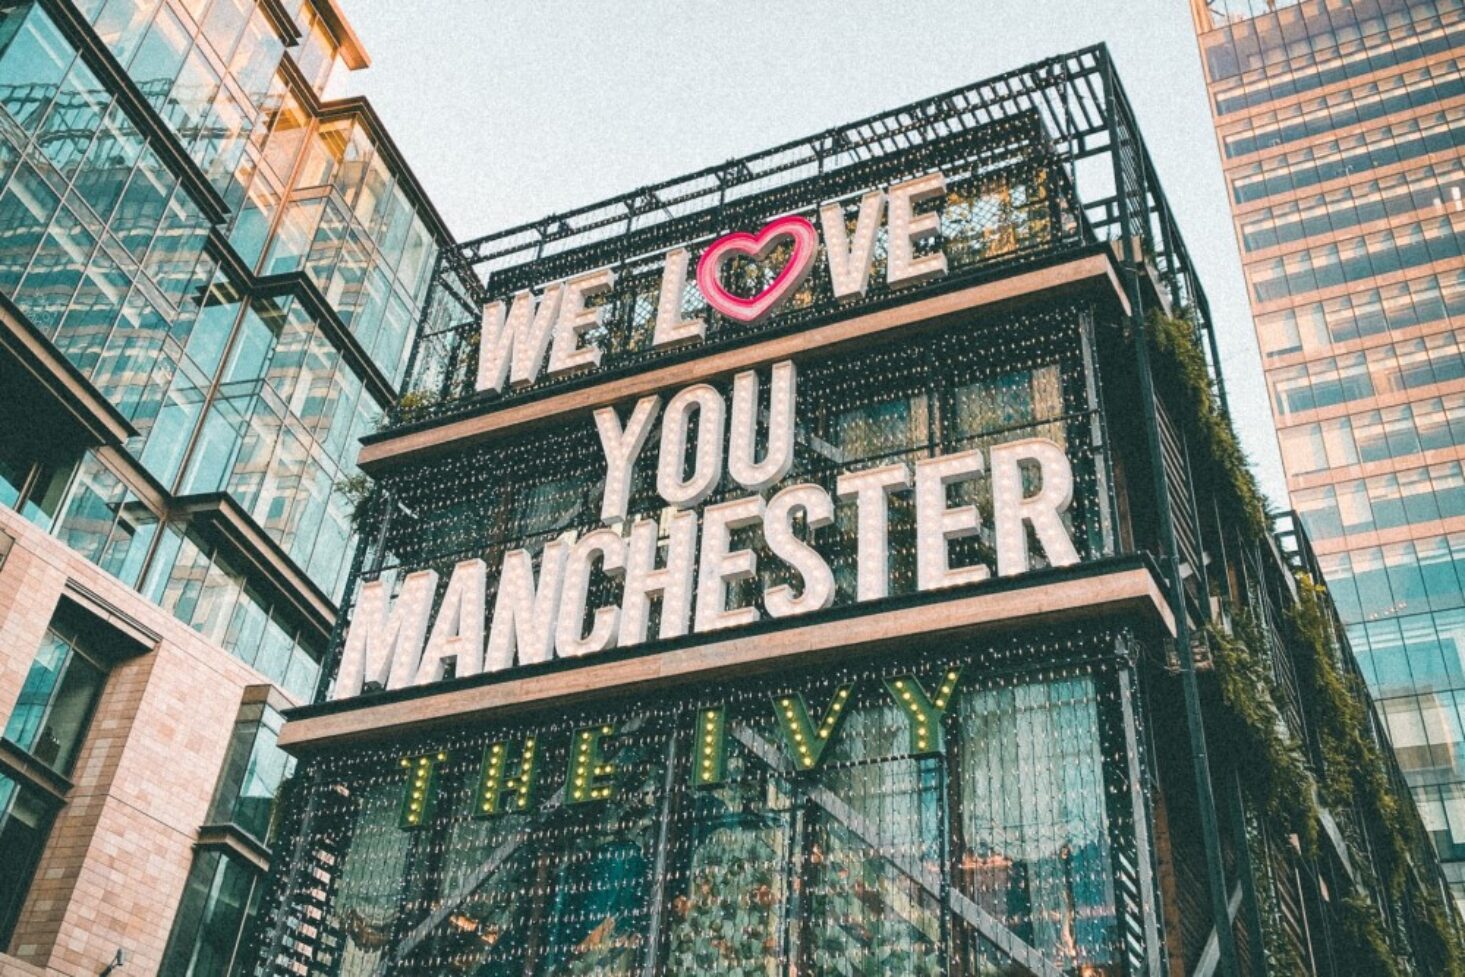 Attractions in Manchester